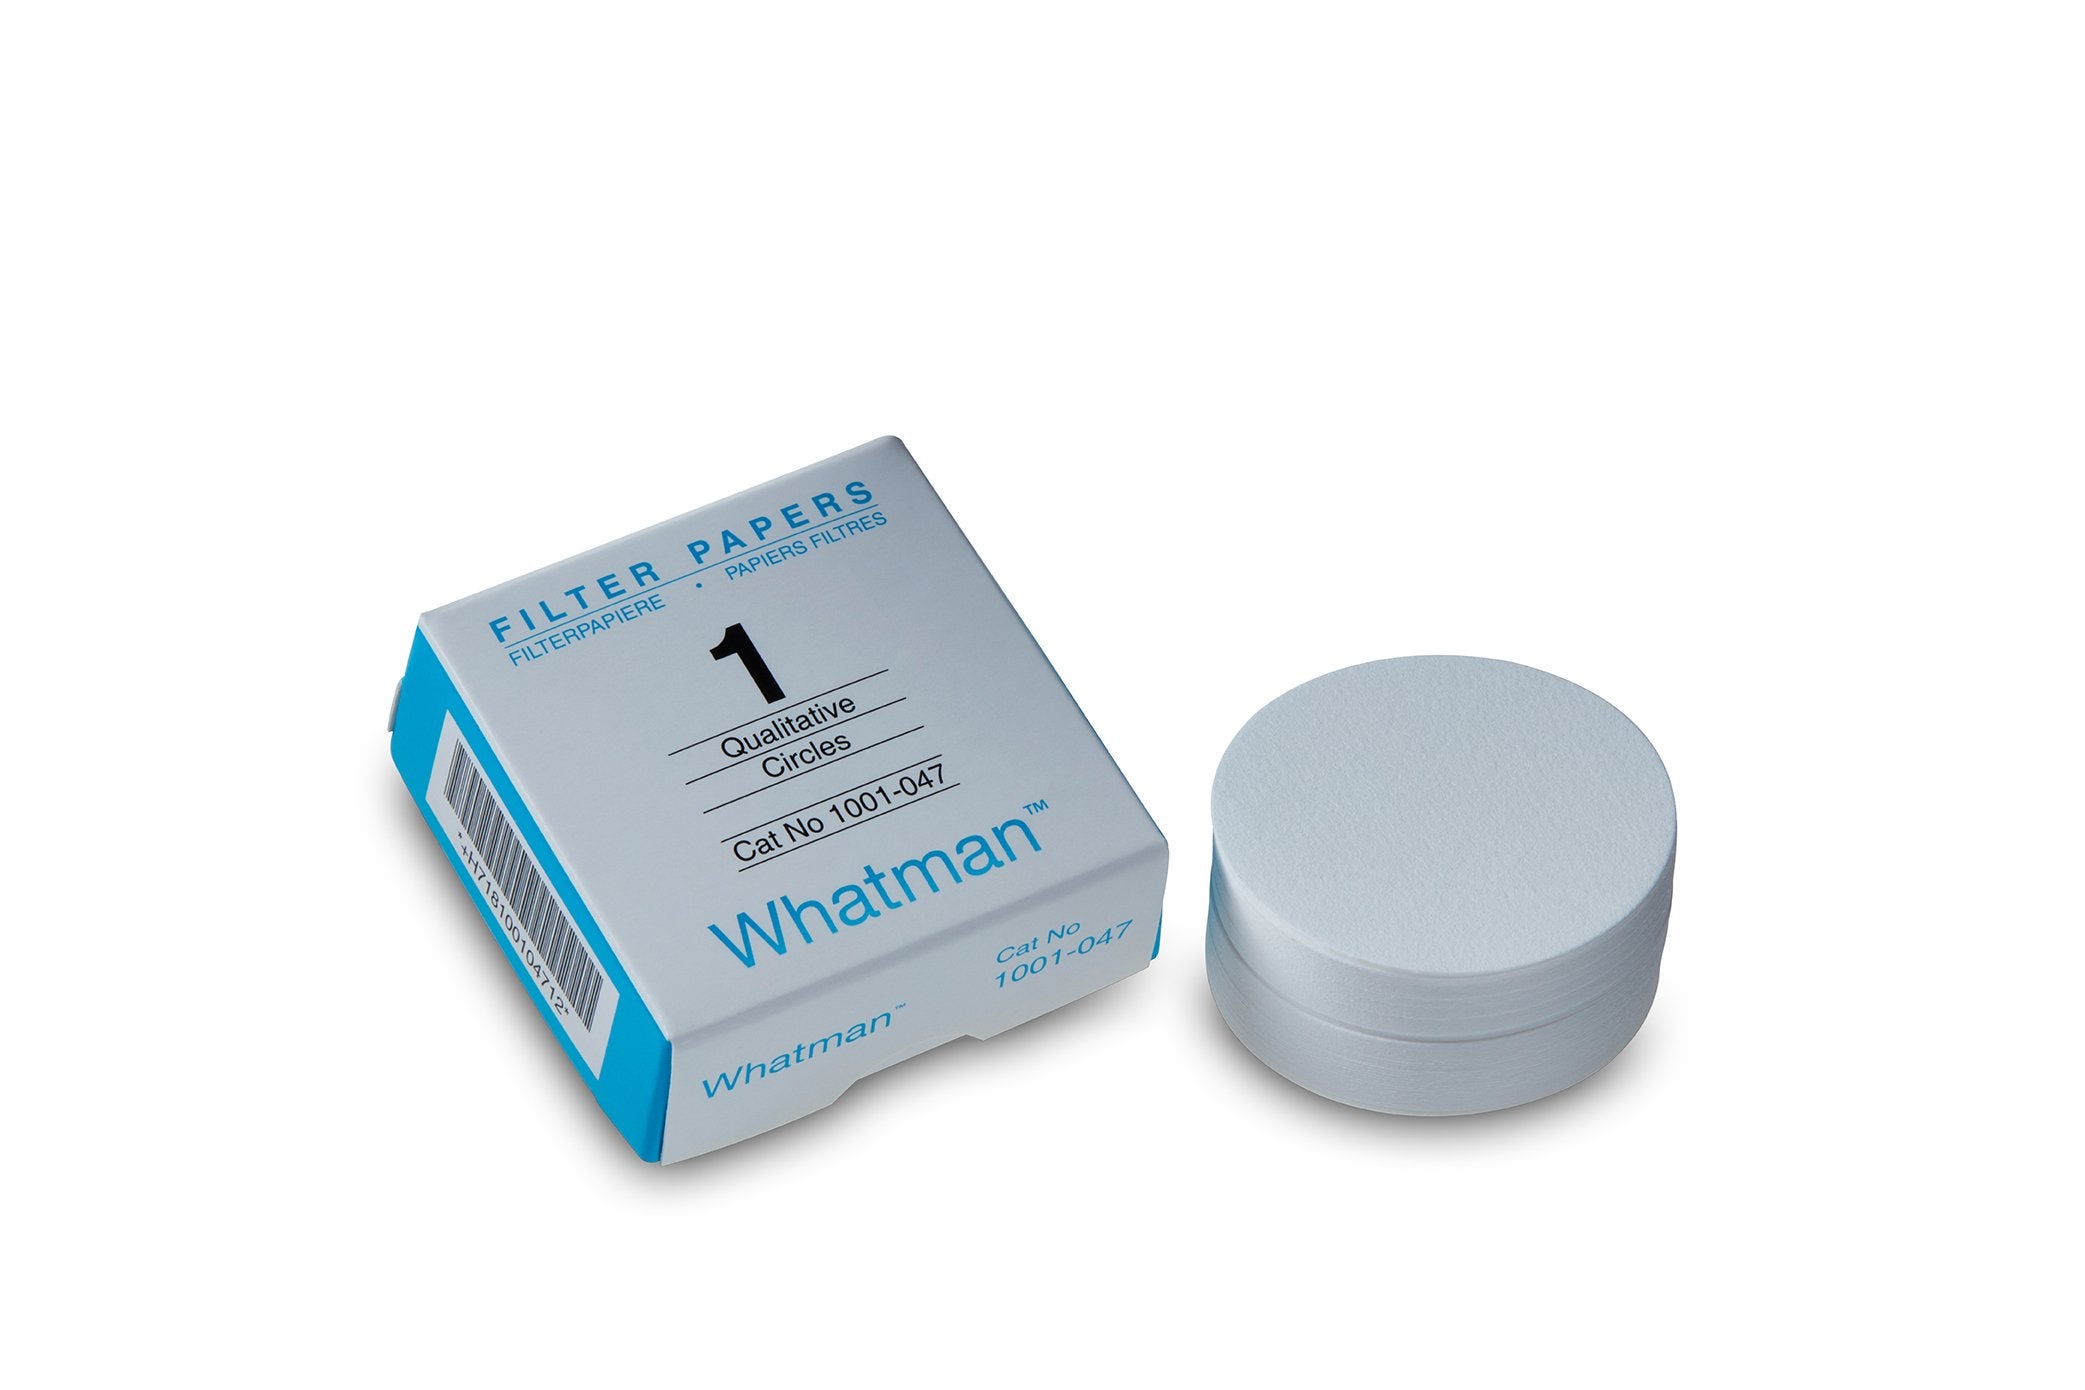 Whatman 3001-964 Cellulose Chromatography Paper, Grade 1 Chr Chromatography Strips, CRL, 11 x 21.3cm with 12 strips of 1.5cm, 1 Chr Sheet Divided into 15mm Lnes For Running up to 12 Samples in Parallel, 100/pk